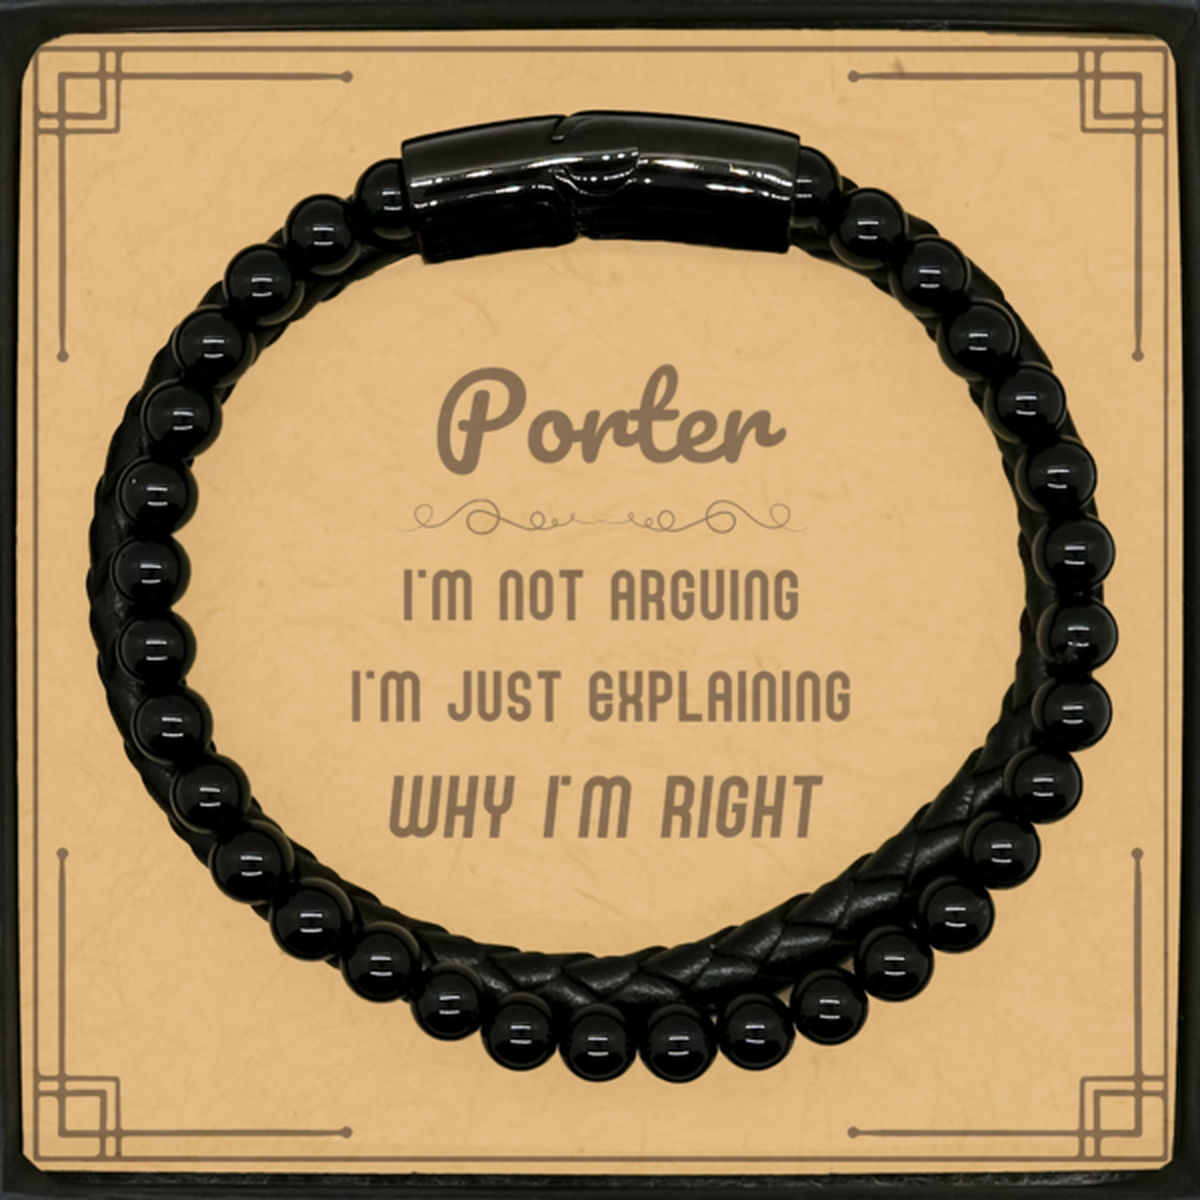 Porter I'm not Arguing. I'm Just Explaining Why I'm RIGHT Stone Leather Bracelets, Funny Saying Quote Porter Gifts For Porter Message Card Graduation Birthday Christmas Gifts for Men Women Coworker